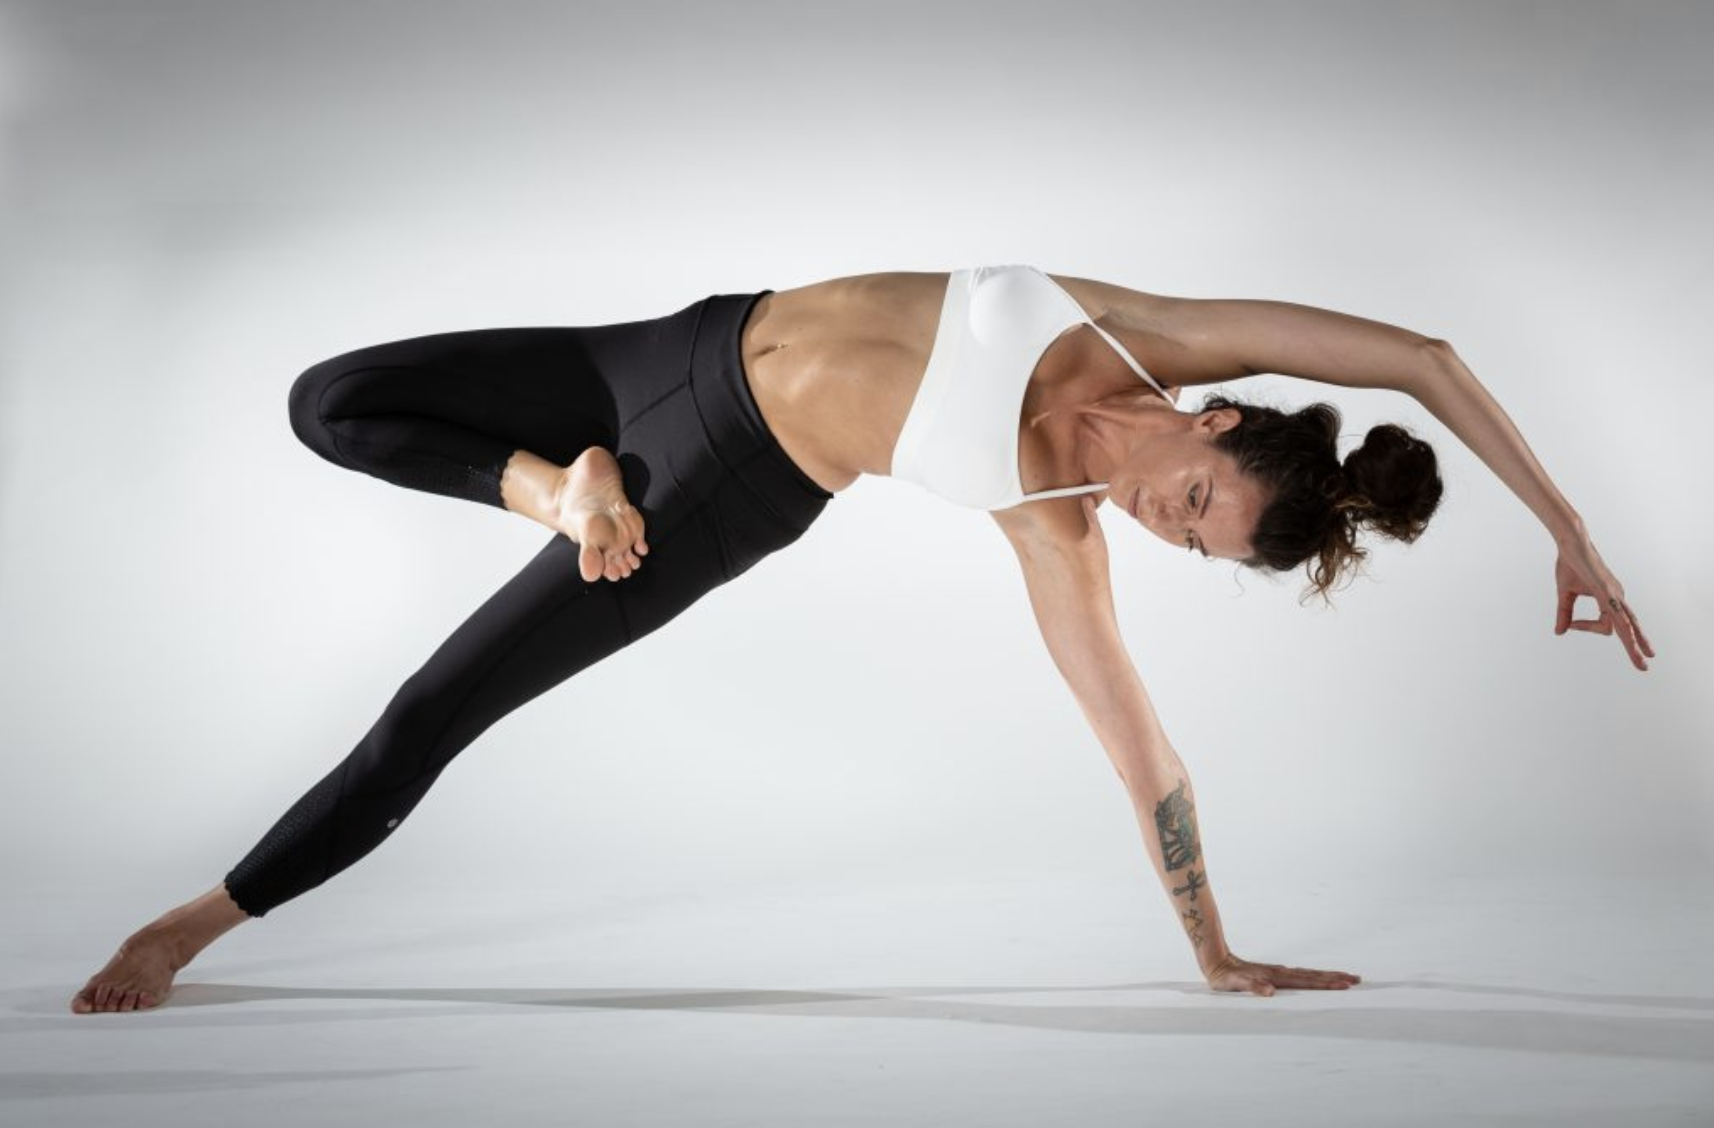 Increase Your Flexibility & Stress with Hot Yoga - Mend - Medium